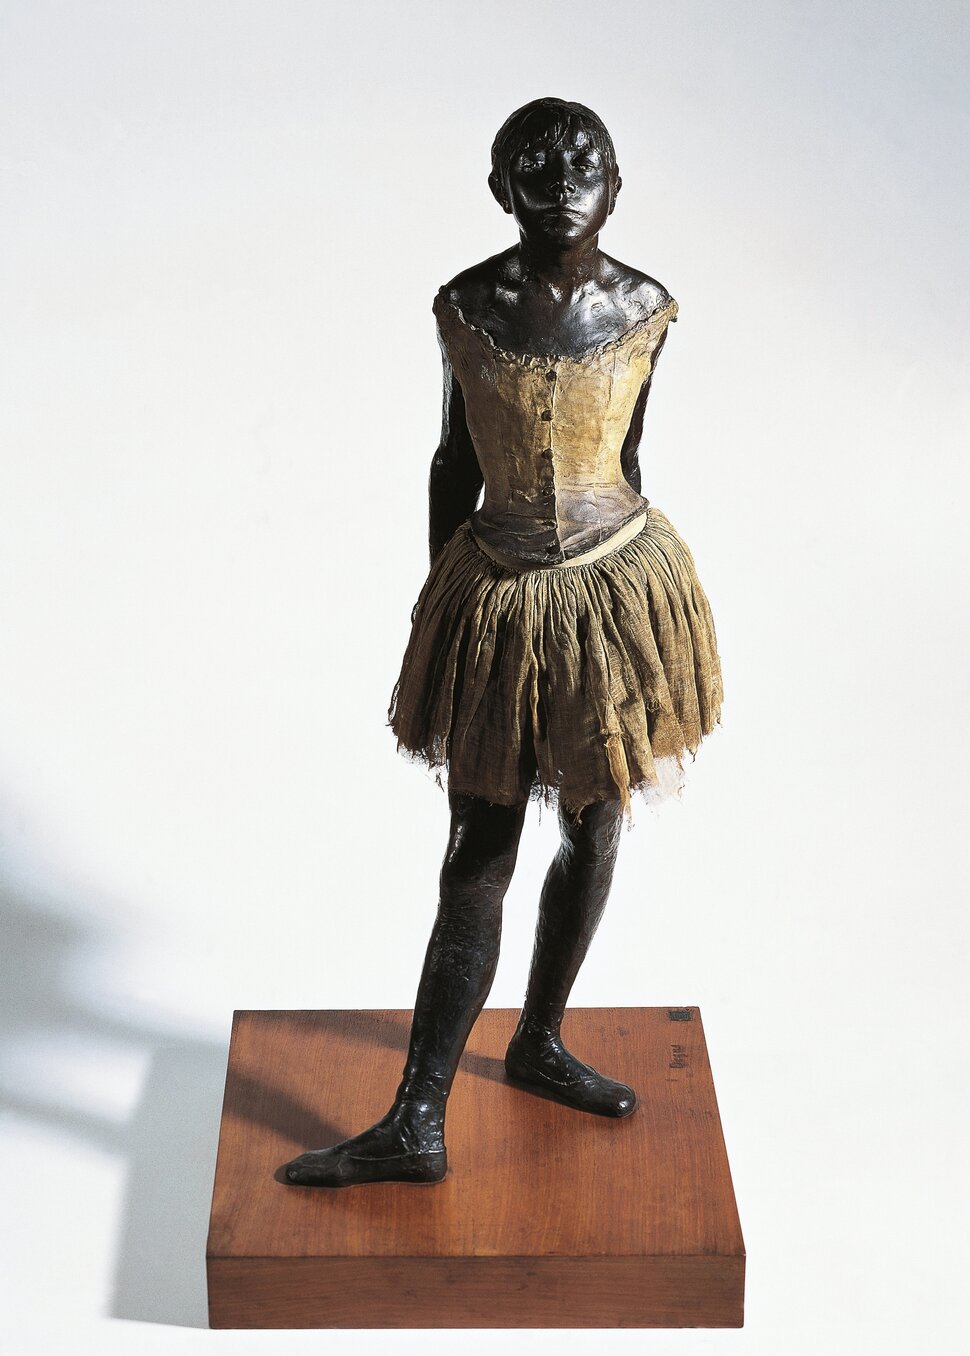 Author Camille Laurens explores the relationship between Degas and van Goethem in her book&nbsp;<i>Little Dancer Aged Fourtee